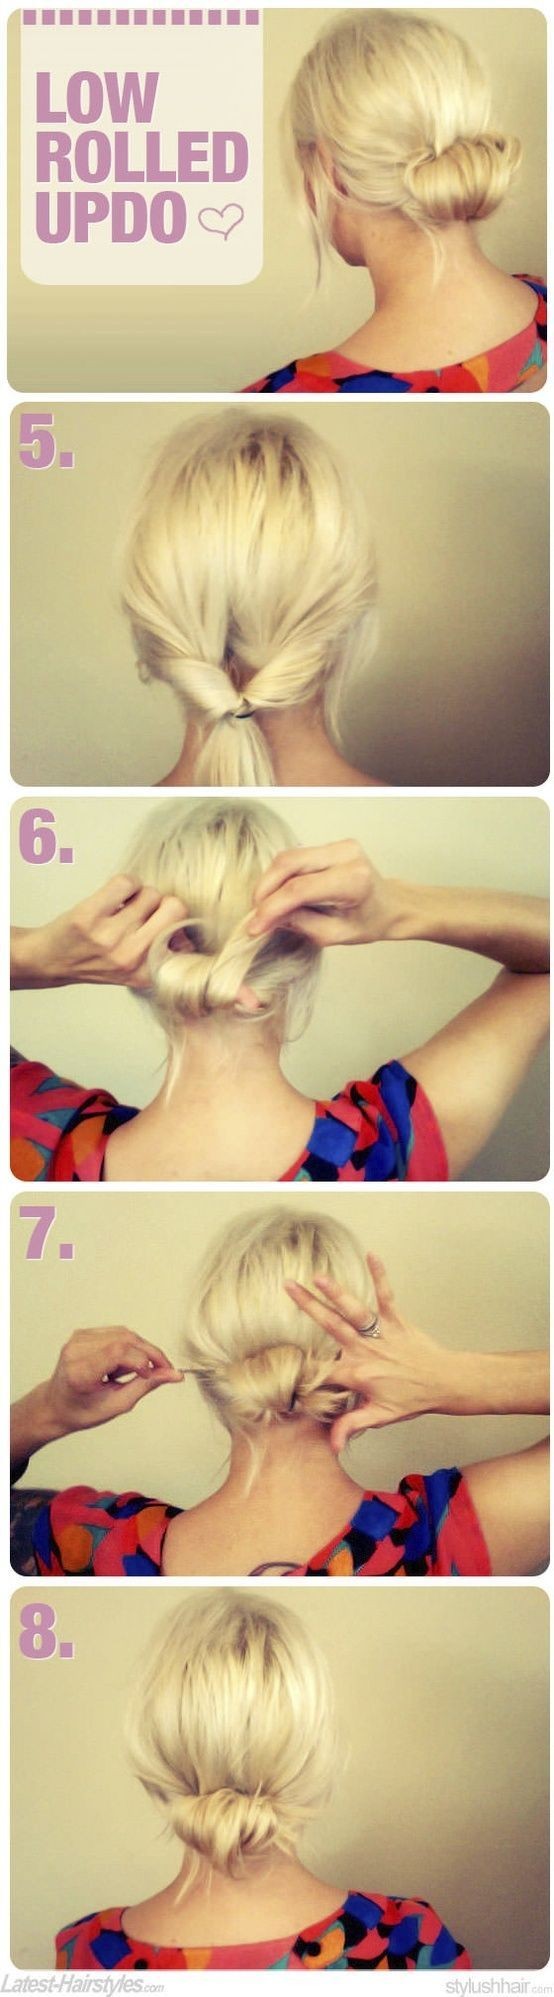 Low rolled updo hairstyle